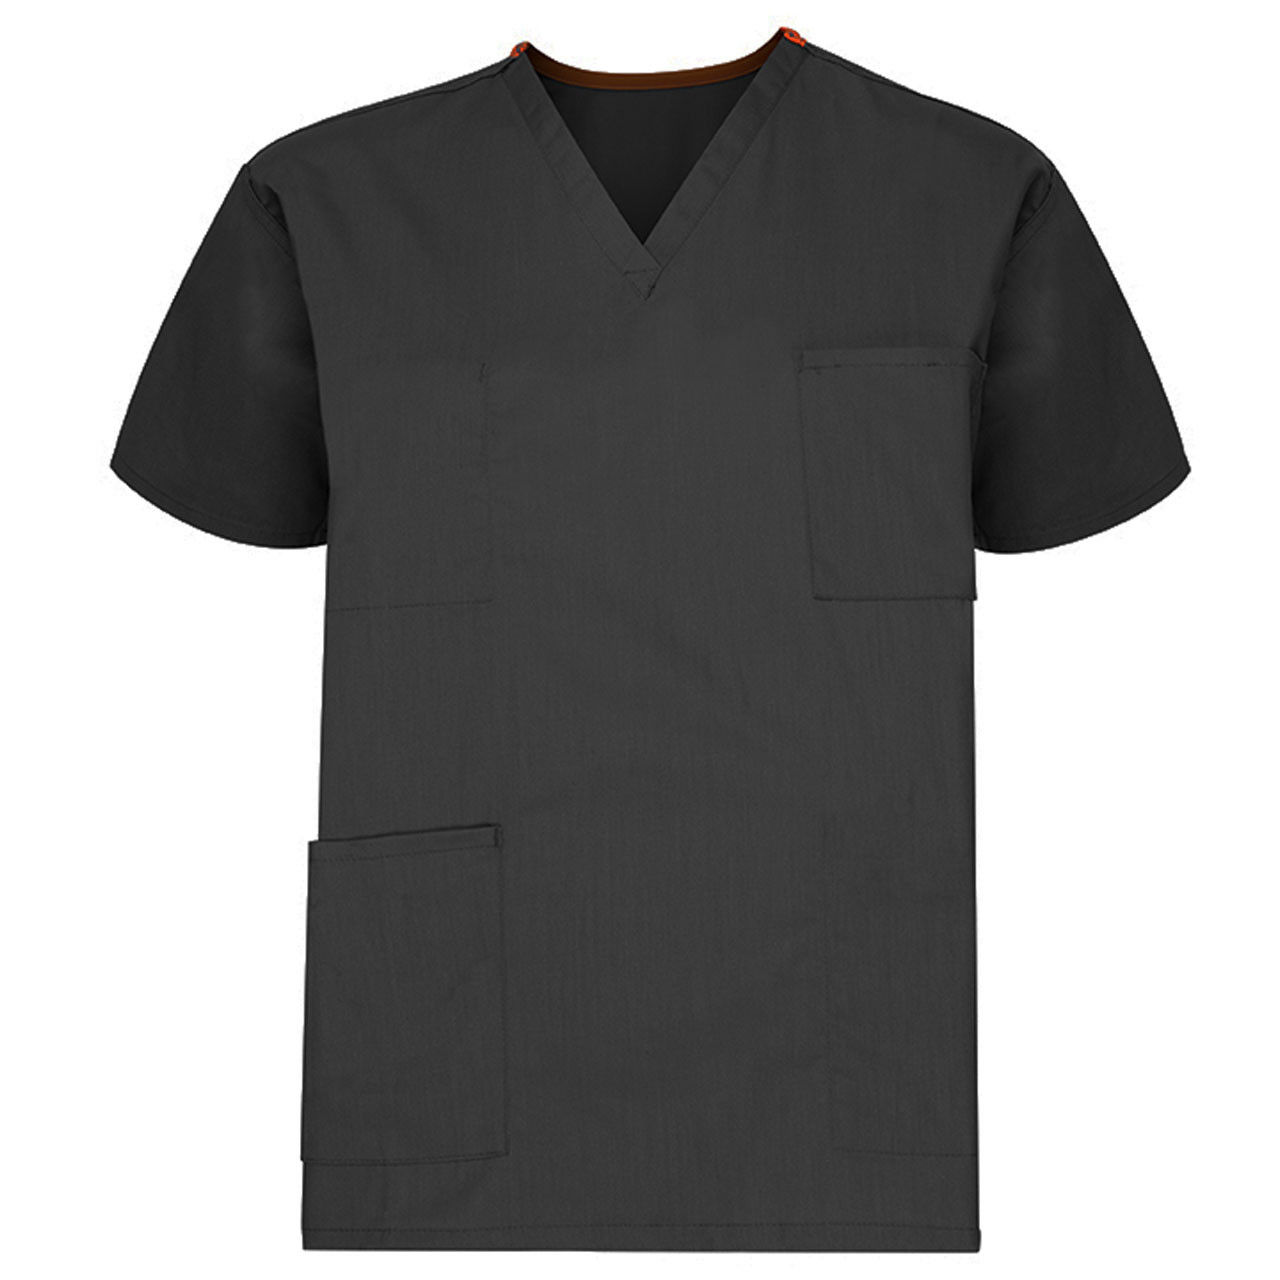 What are the features on the front of these reversible scrubs?